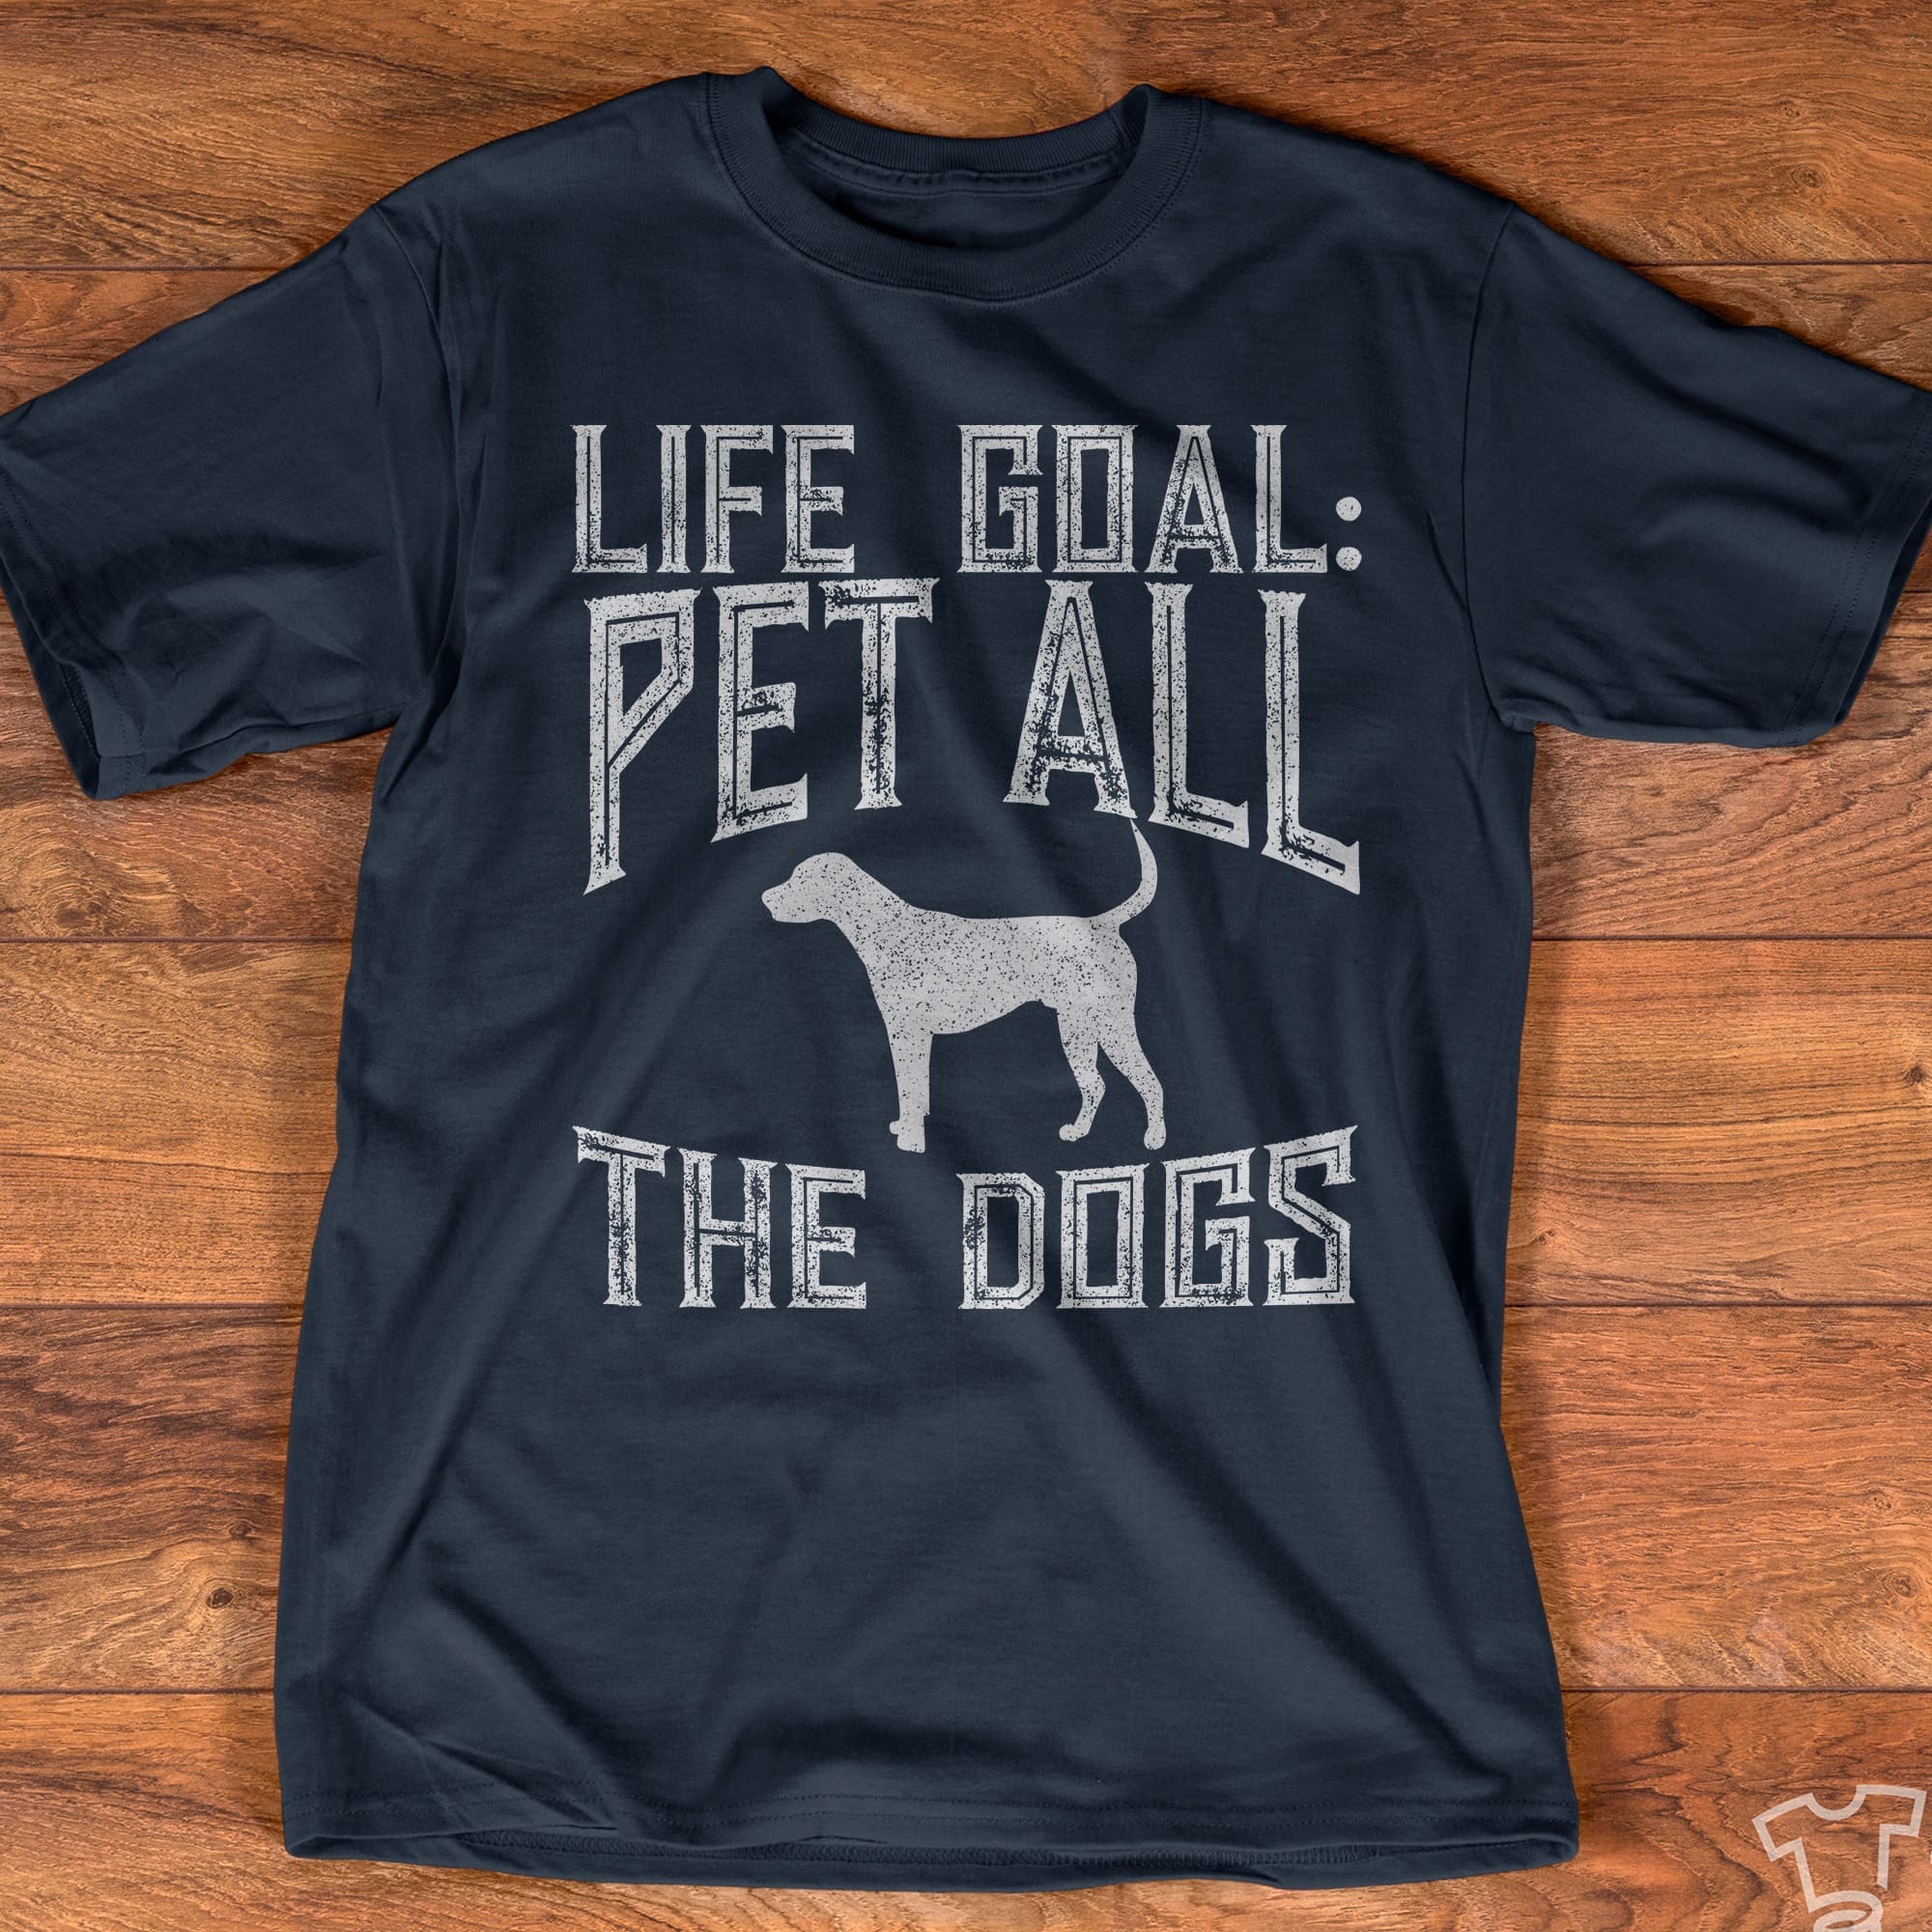 Life goal - Pet all the dogs, dog lover T-shirt